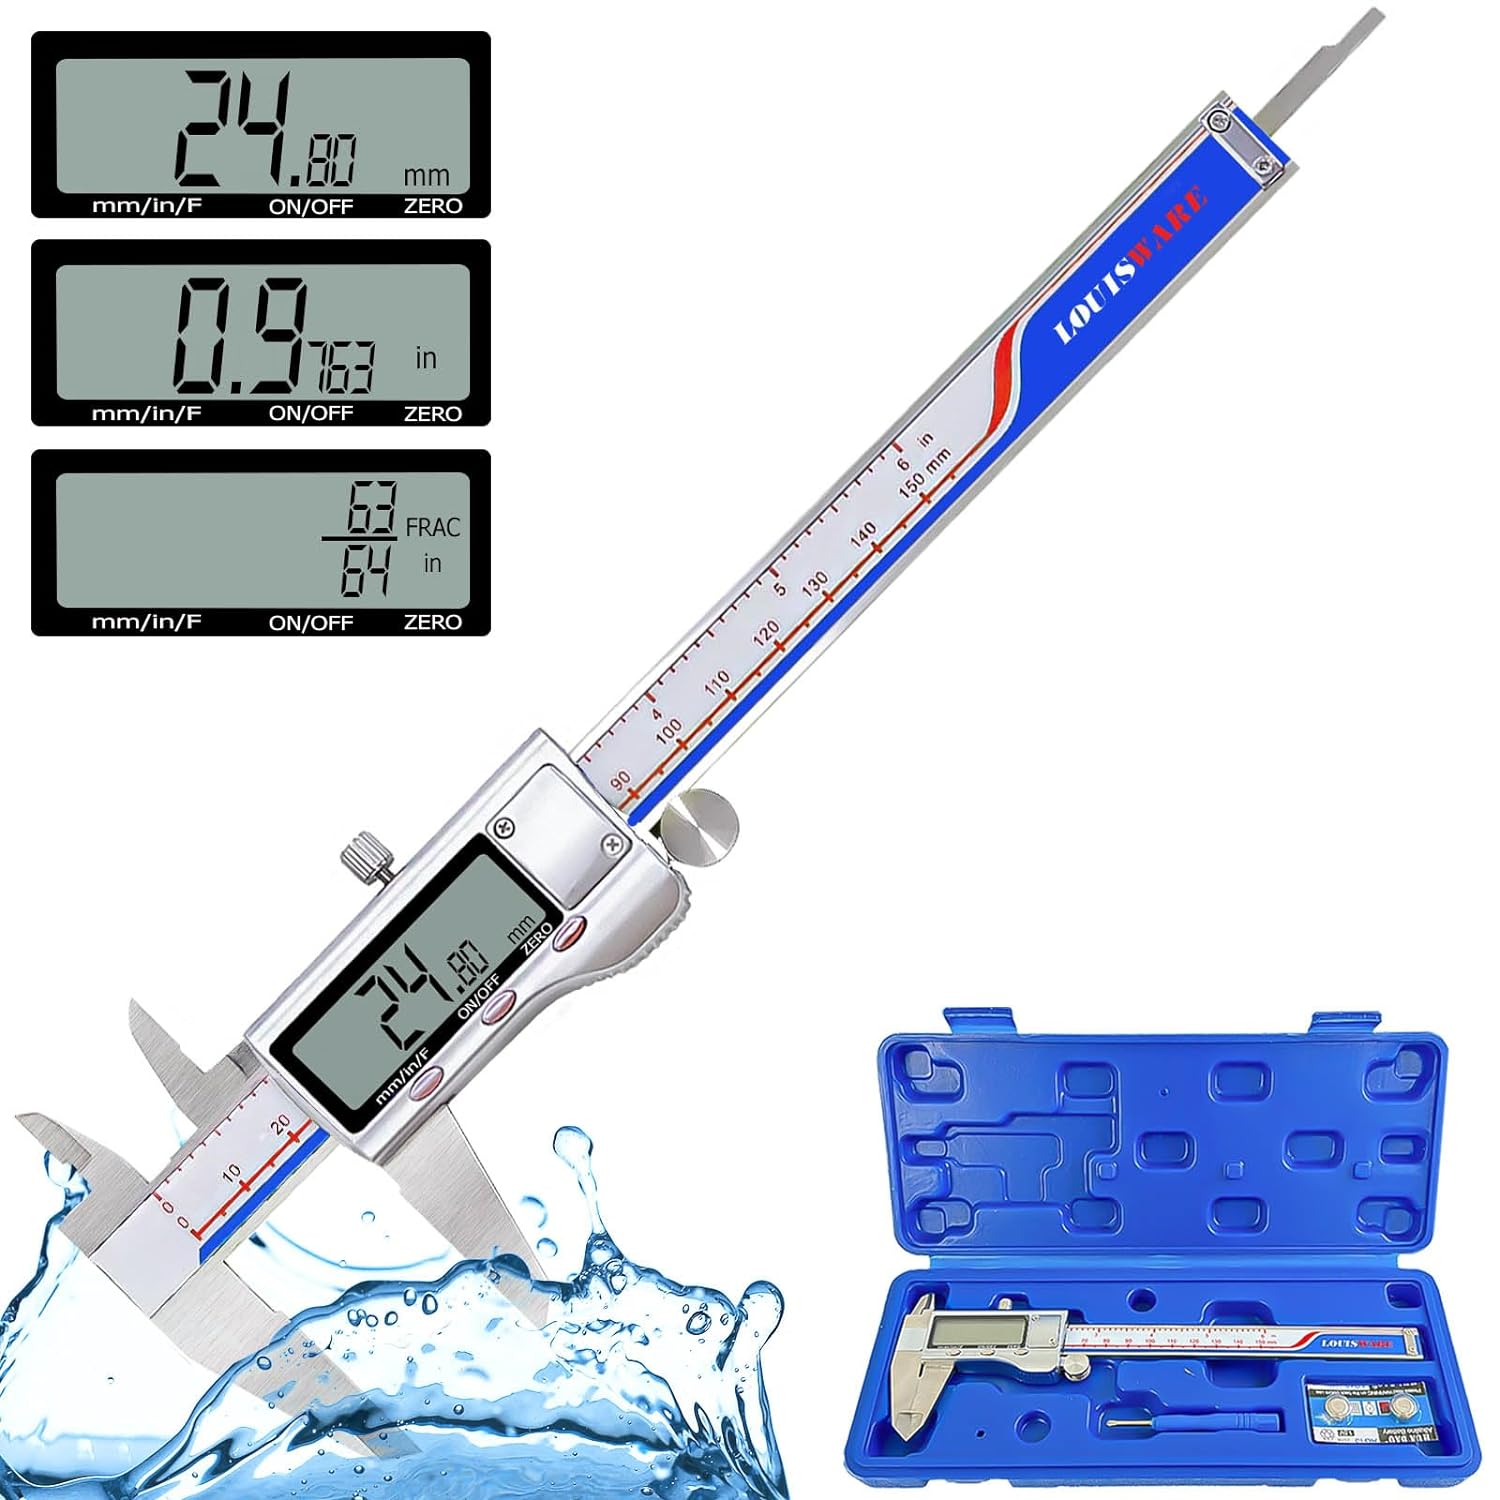 Digital Caliper, Vernier Caliper Measuring Tool with Stainless Steel, Electronic Micrometer Caliper with Large LCD Screen, Auto-Off Feature, Easy Switch from Inch Metric Fraction, (6 Inch//150 mm)